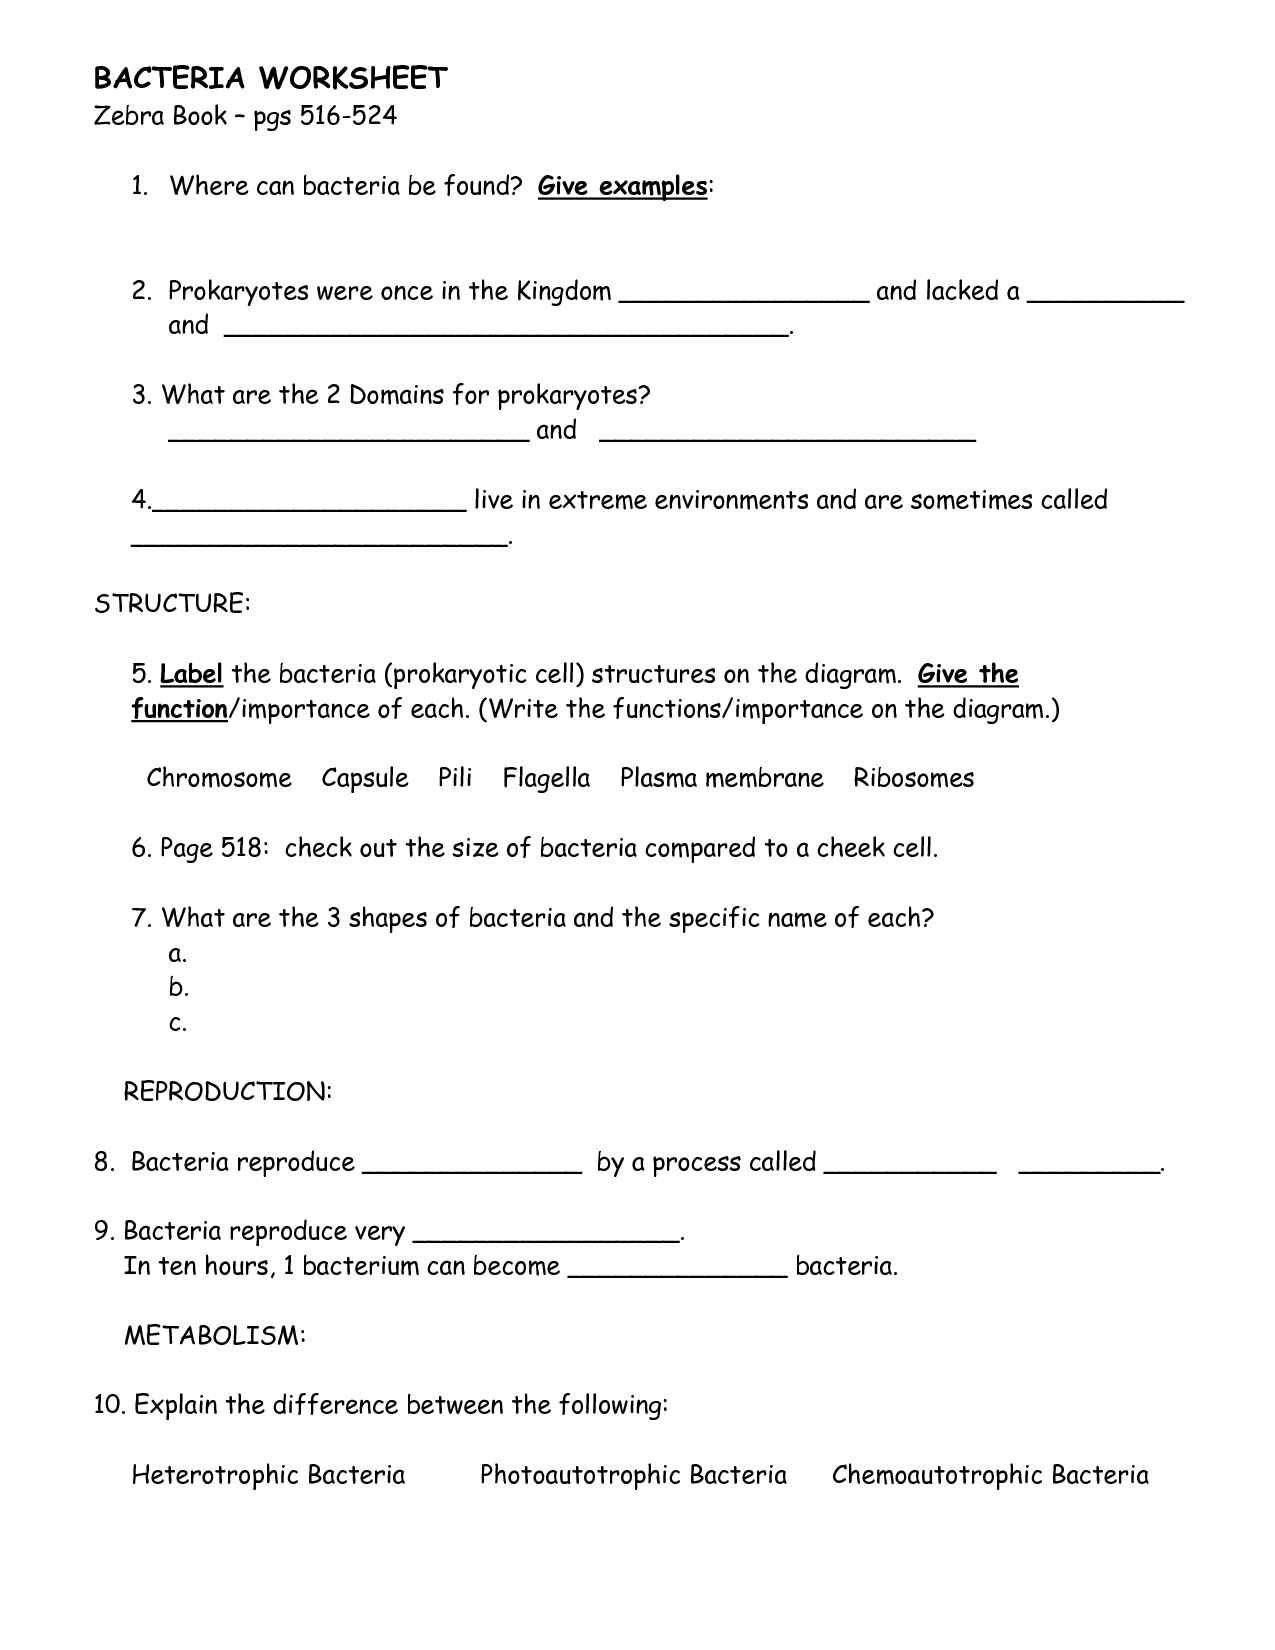 14 Best Images of Viruses And Bacteria Worksheets  Bacteria and Viruses Worksheet Answers 